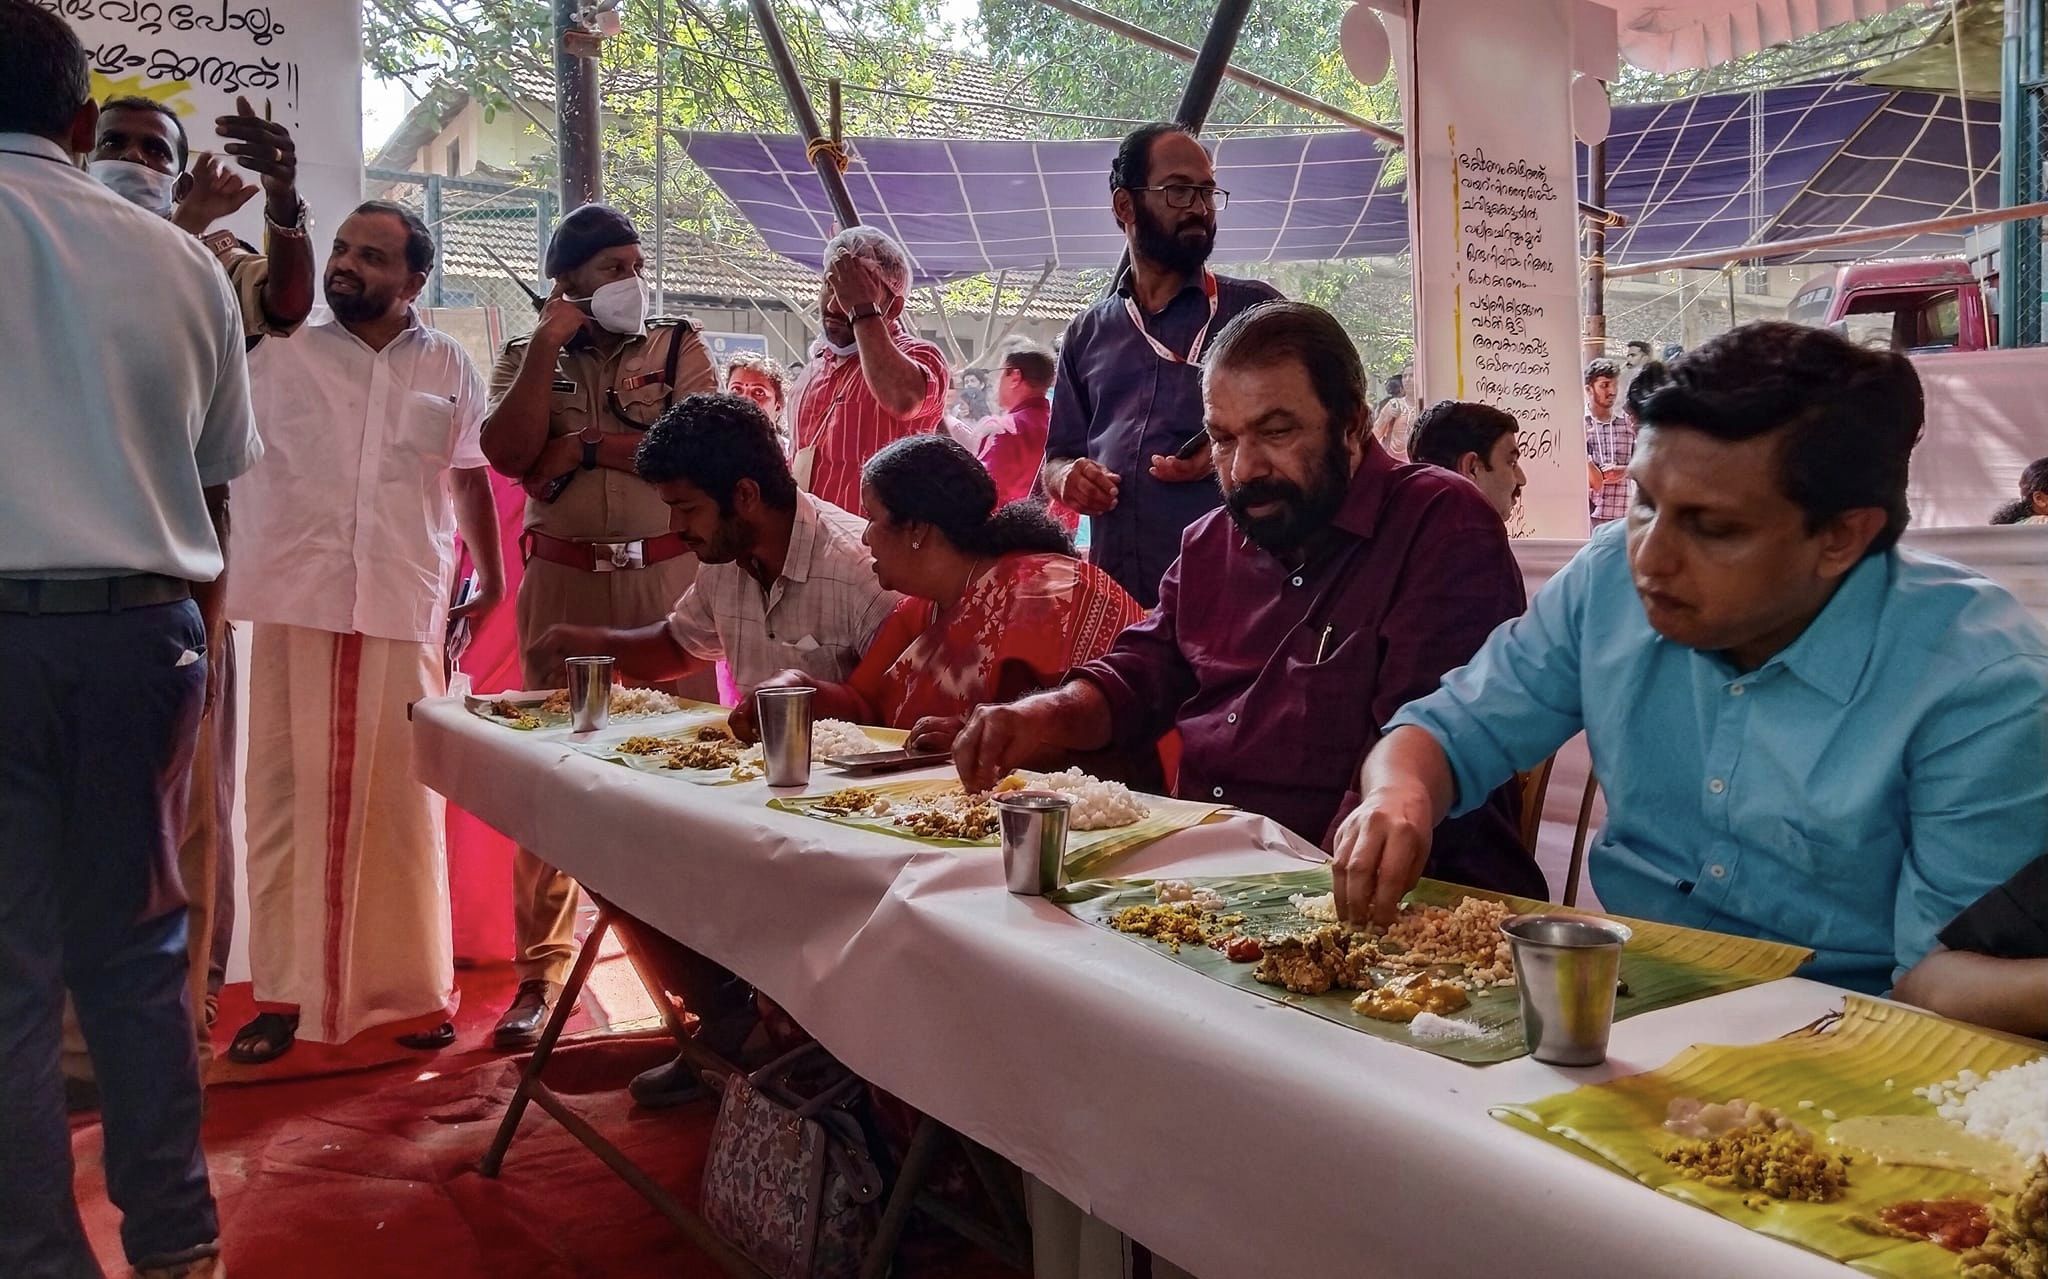 Art and culture take a backseat as netizens have a beef with food served at Kerala school fest